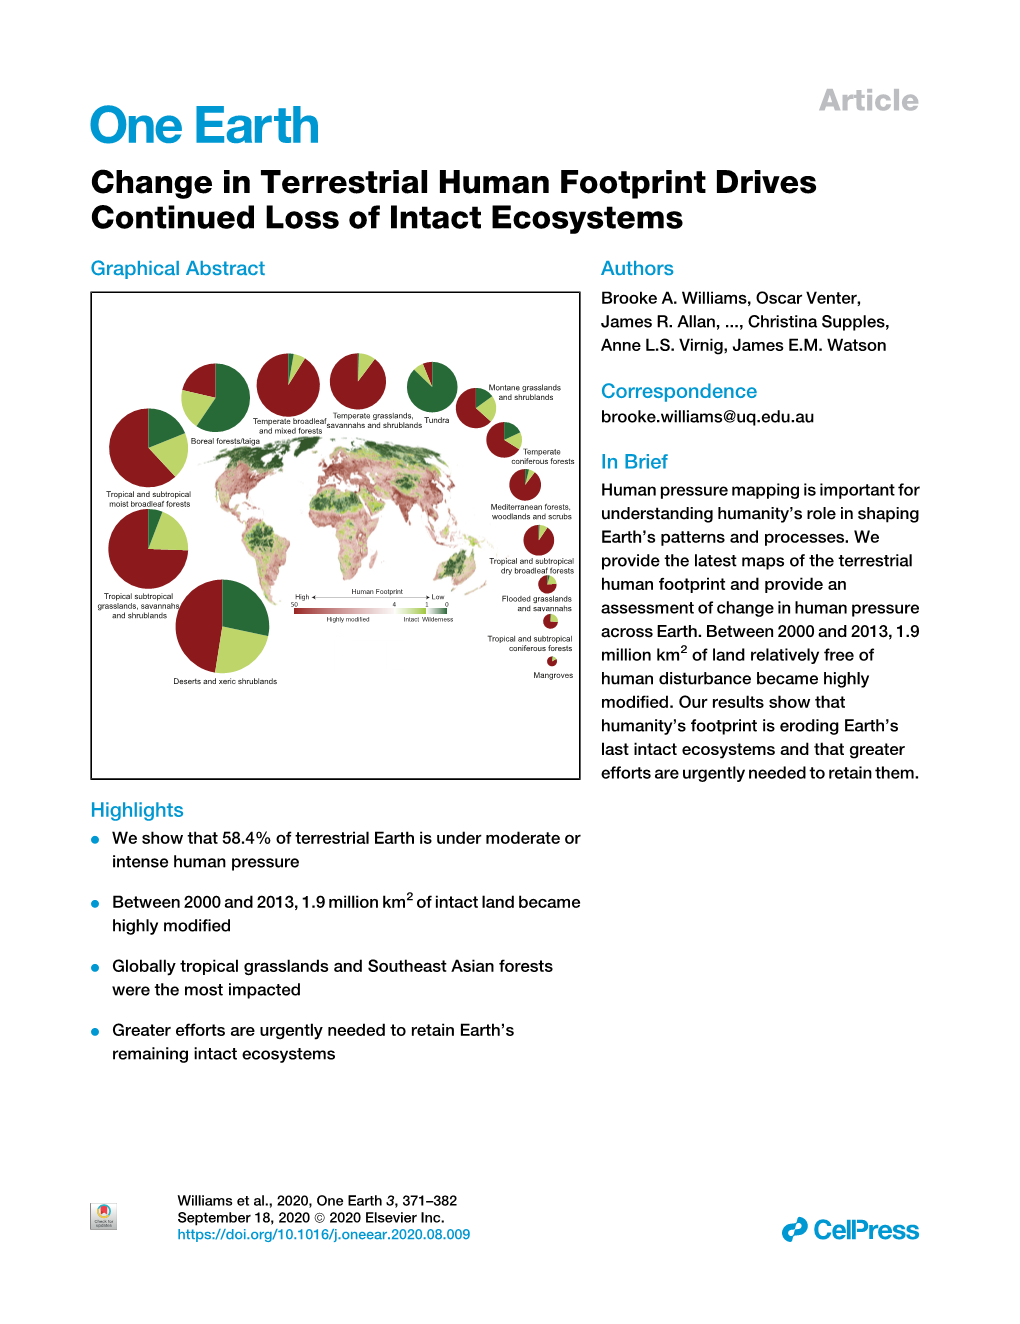 Change in Terrestrial Human Footprint Drives Continued Loss of Intact Ecosystems